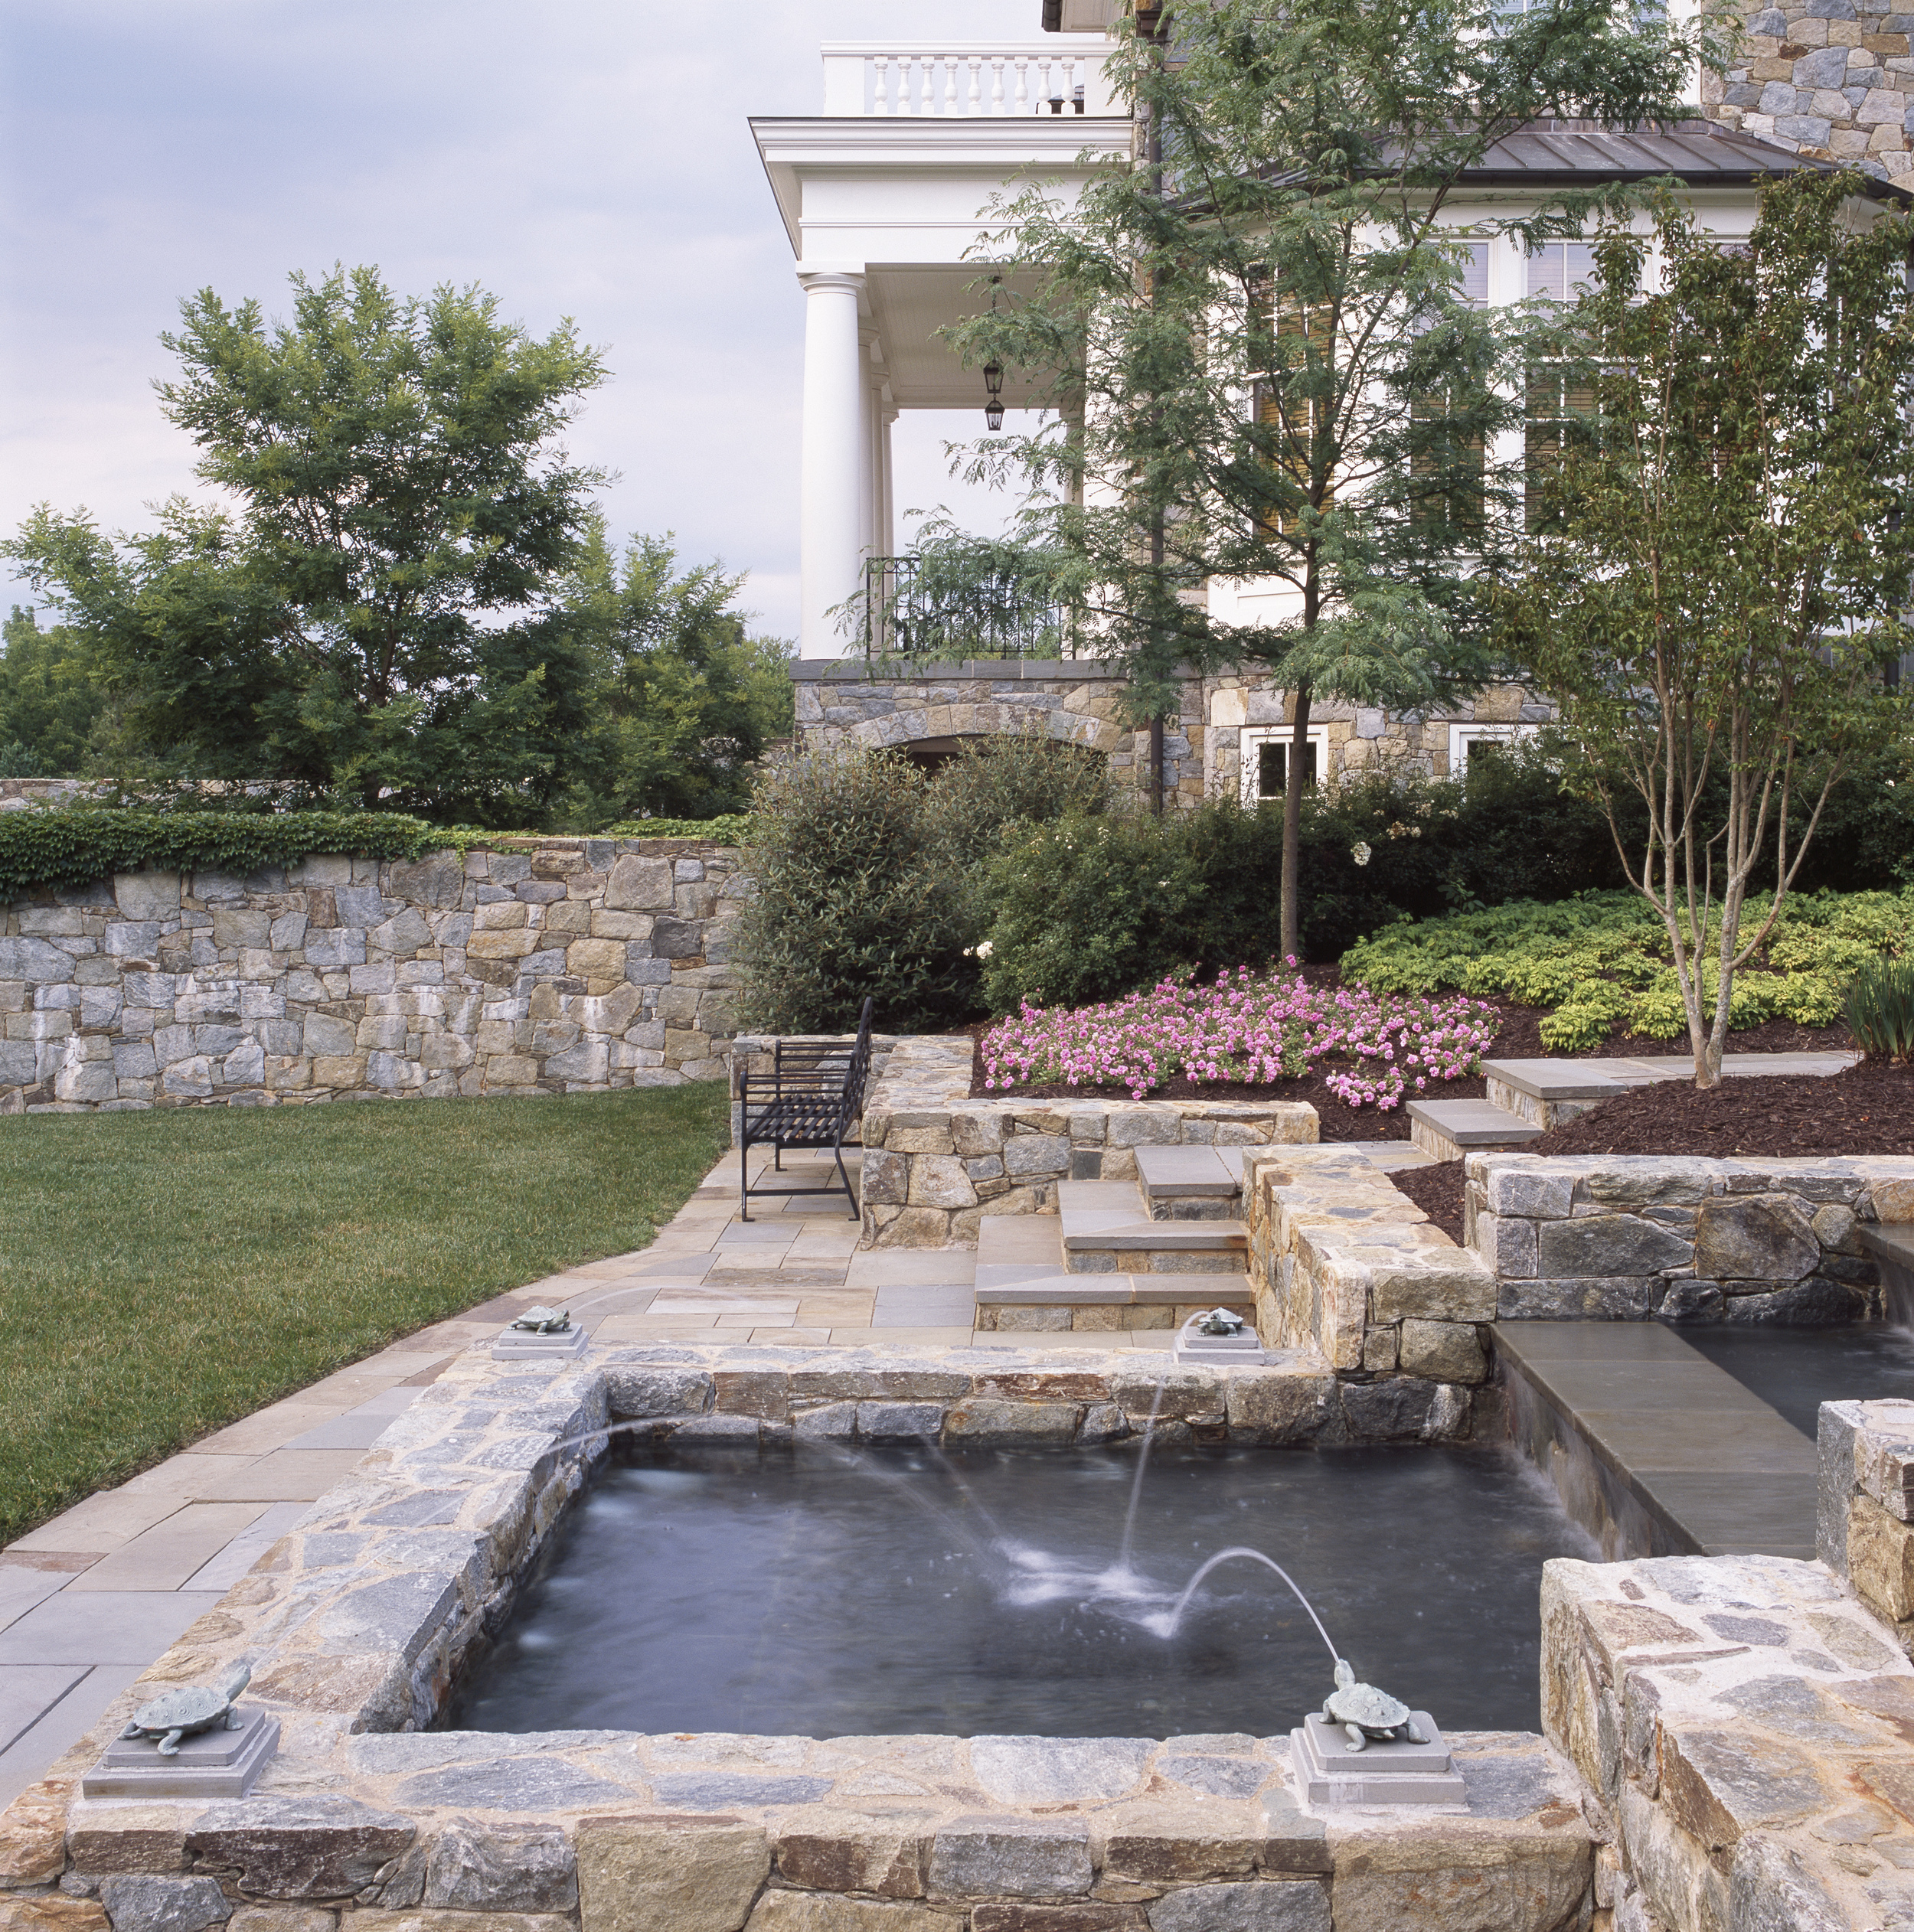   Project Location:&nbsp; Howard County, Maryland  Completion: &nbsp;&nbsp;2006  General Contractor:&nbsp; Horizon Builders, Chapel Valley  Project Architect:&nbsp; Muse Architects  Primary Material Palette: &nbsp;fieldstone, bluestone  Photos By:&nb